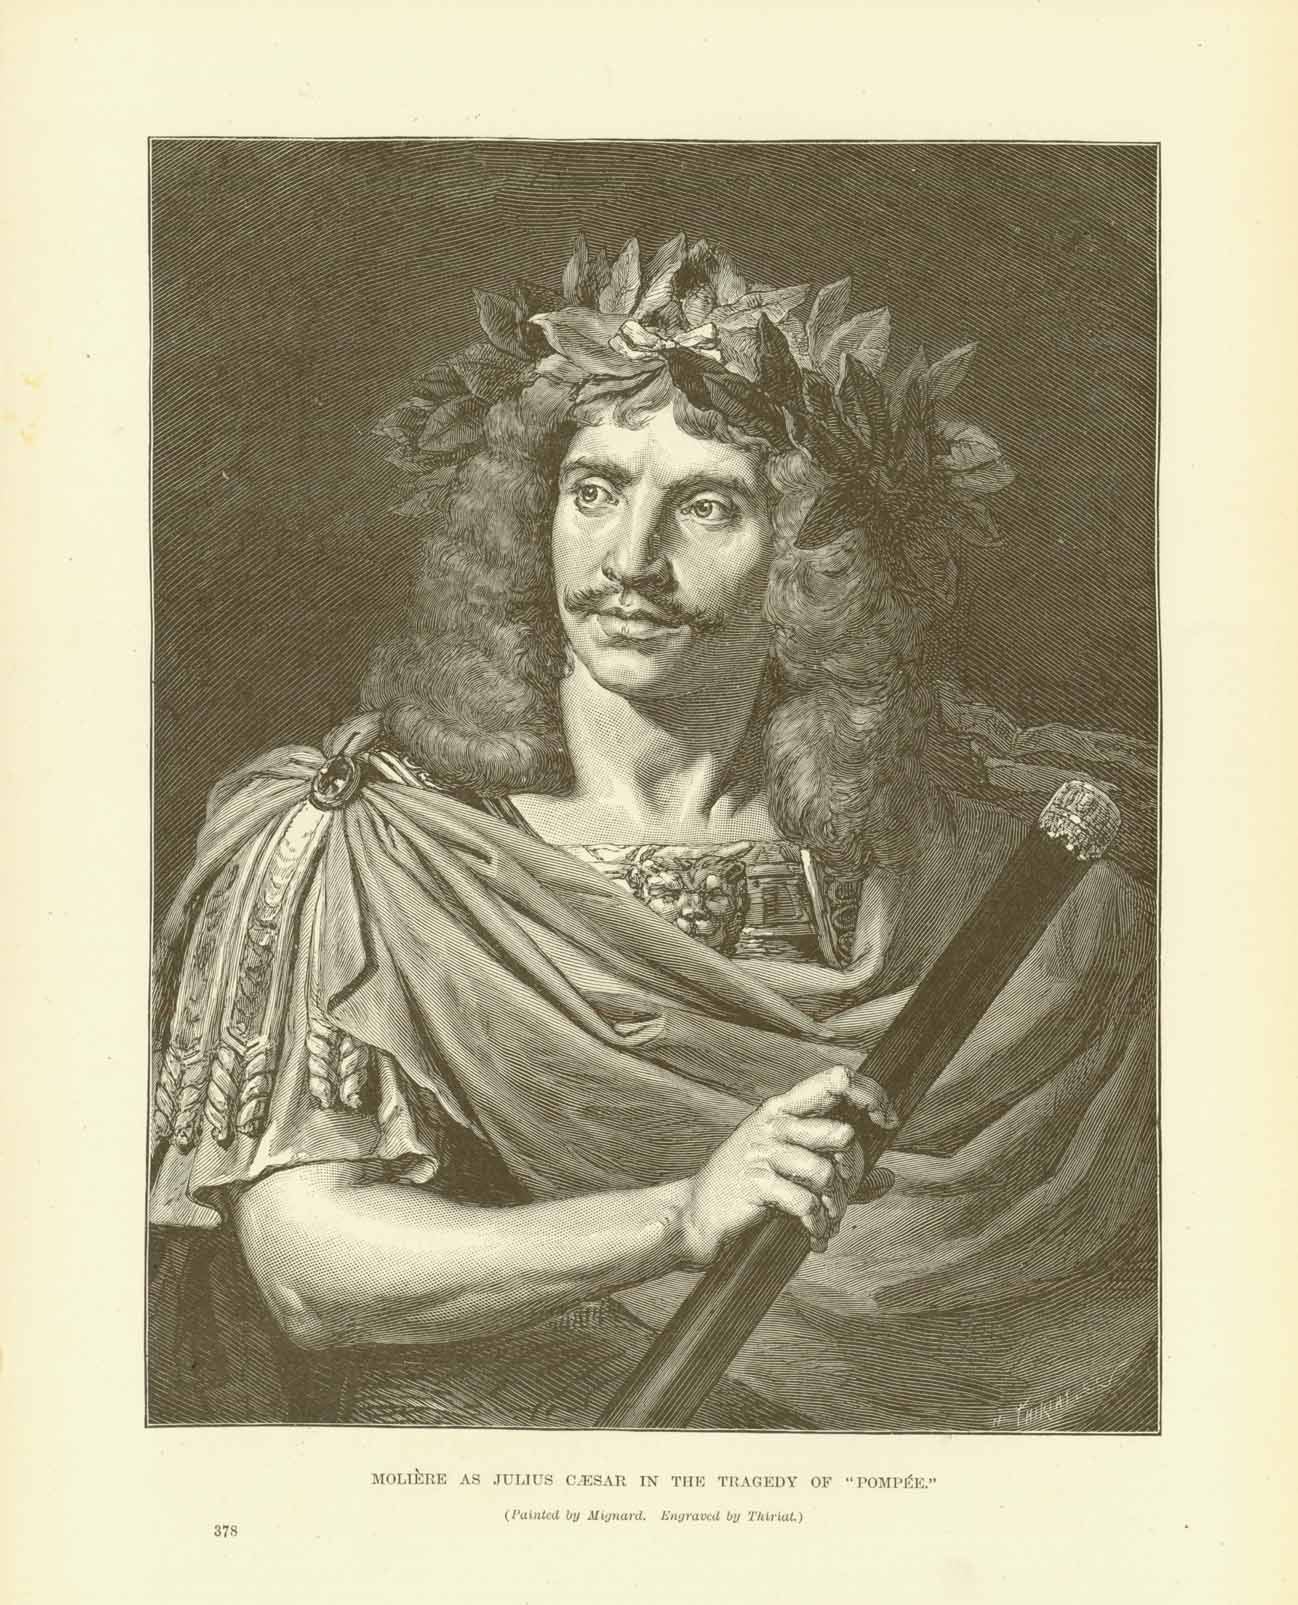 "Moliere as Julius Caeser in the Tragedy of "Pompee"  Wood engraving made after a painting by Mignard and engraved by Thiriat.